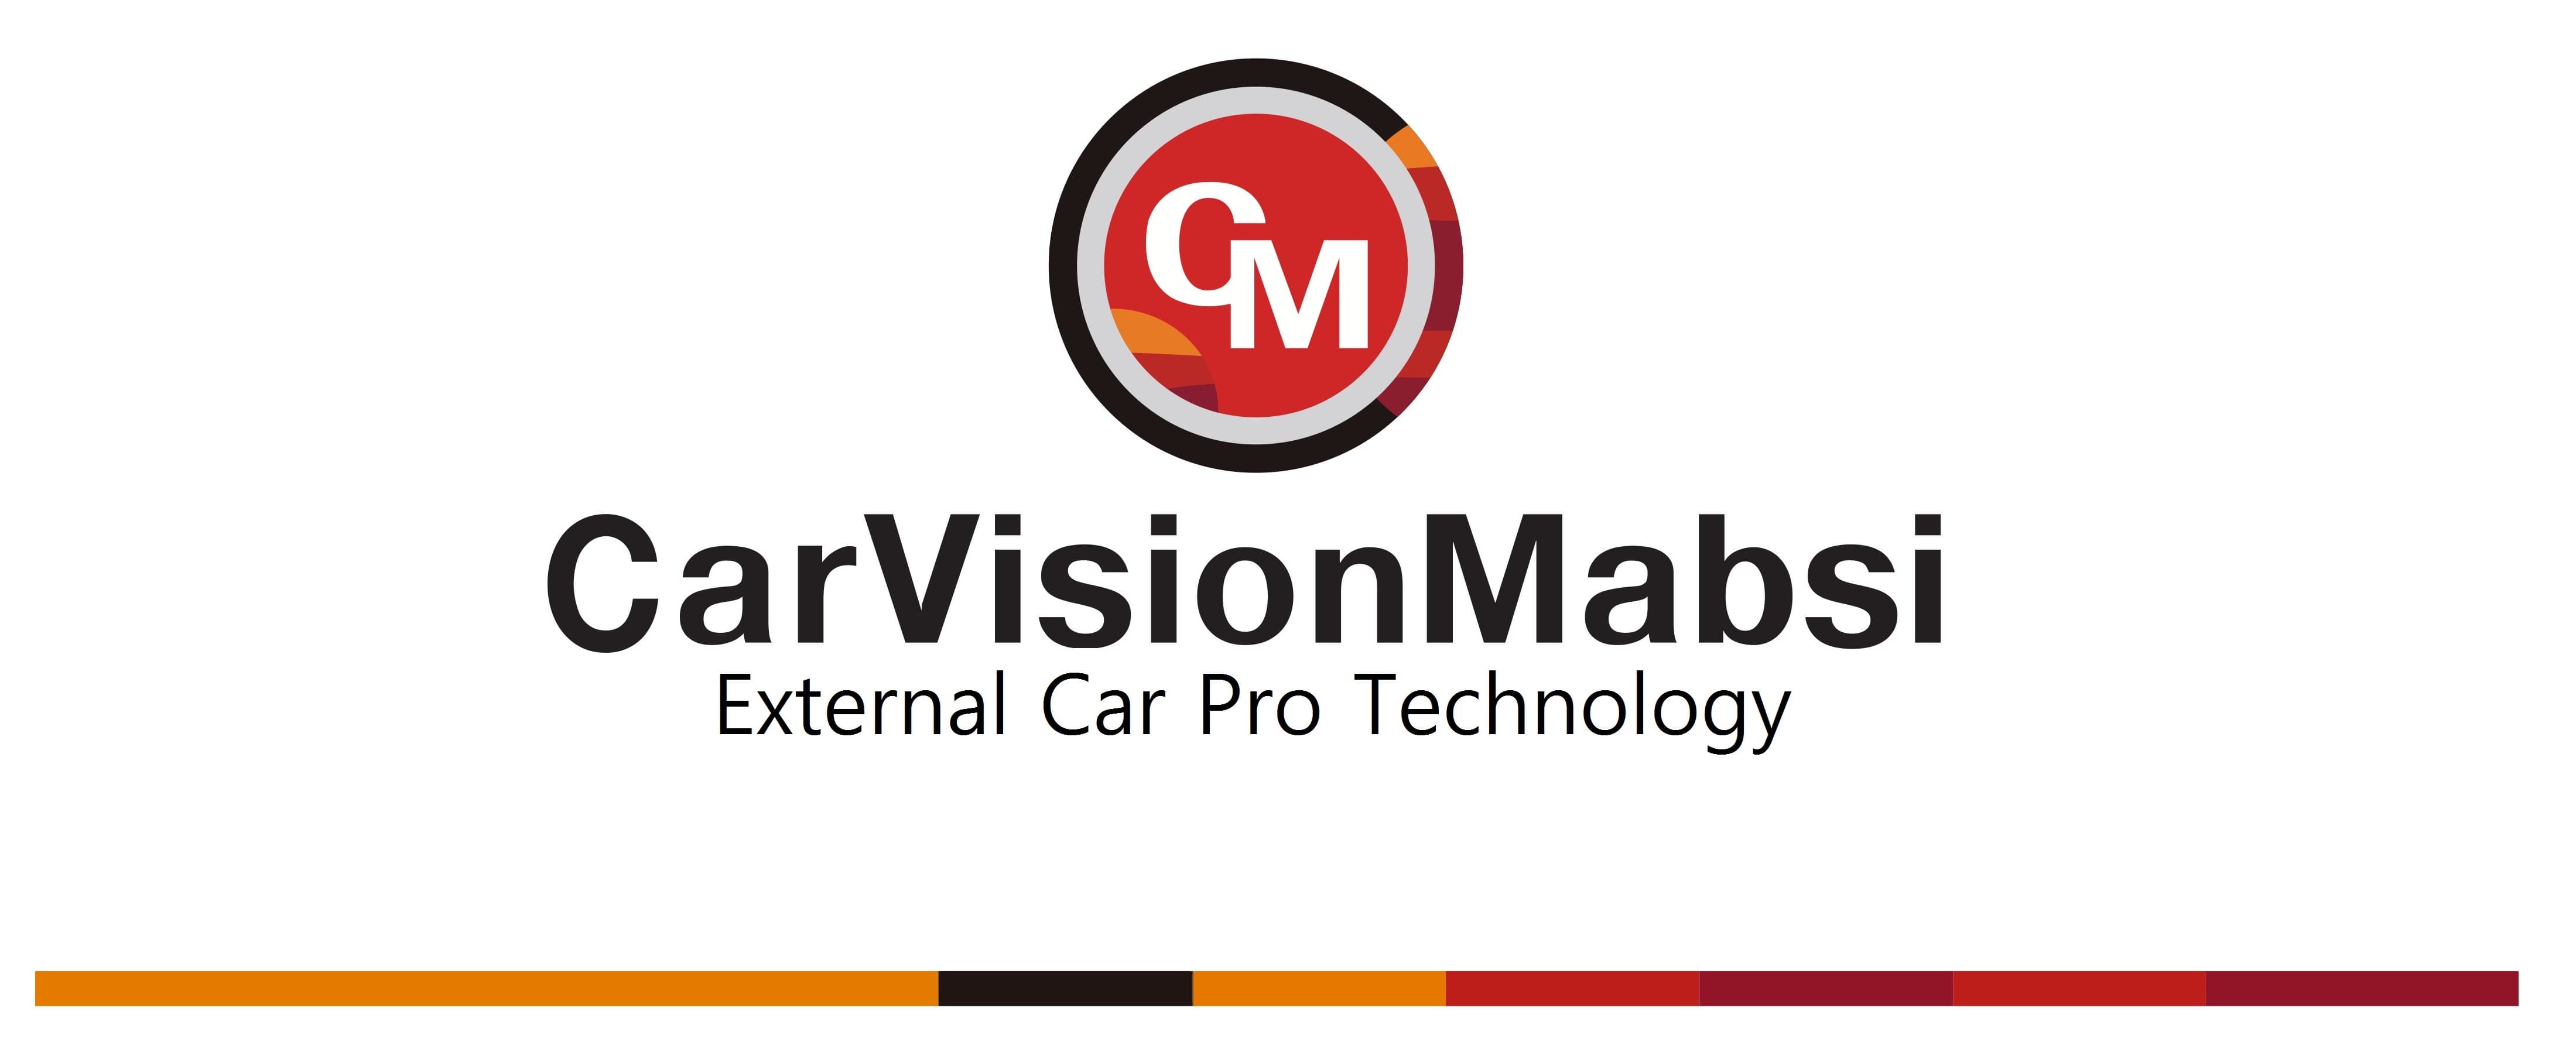 CarVisionMabsi